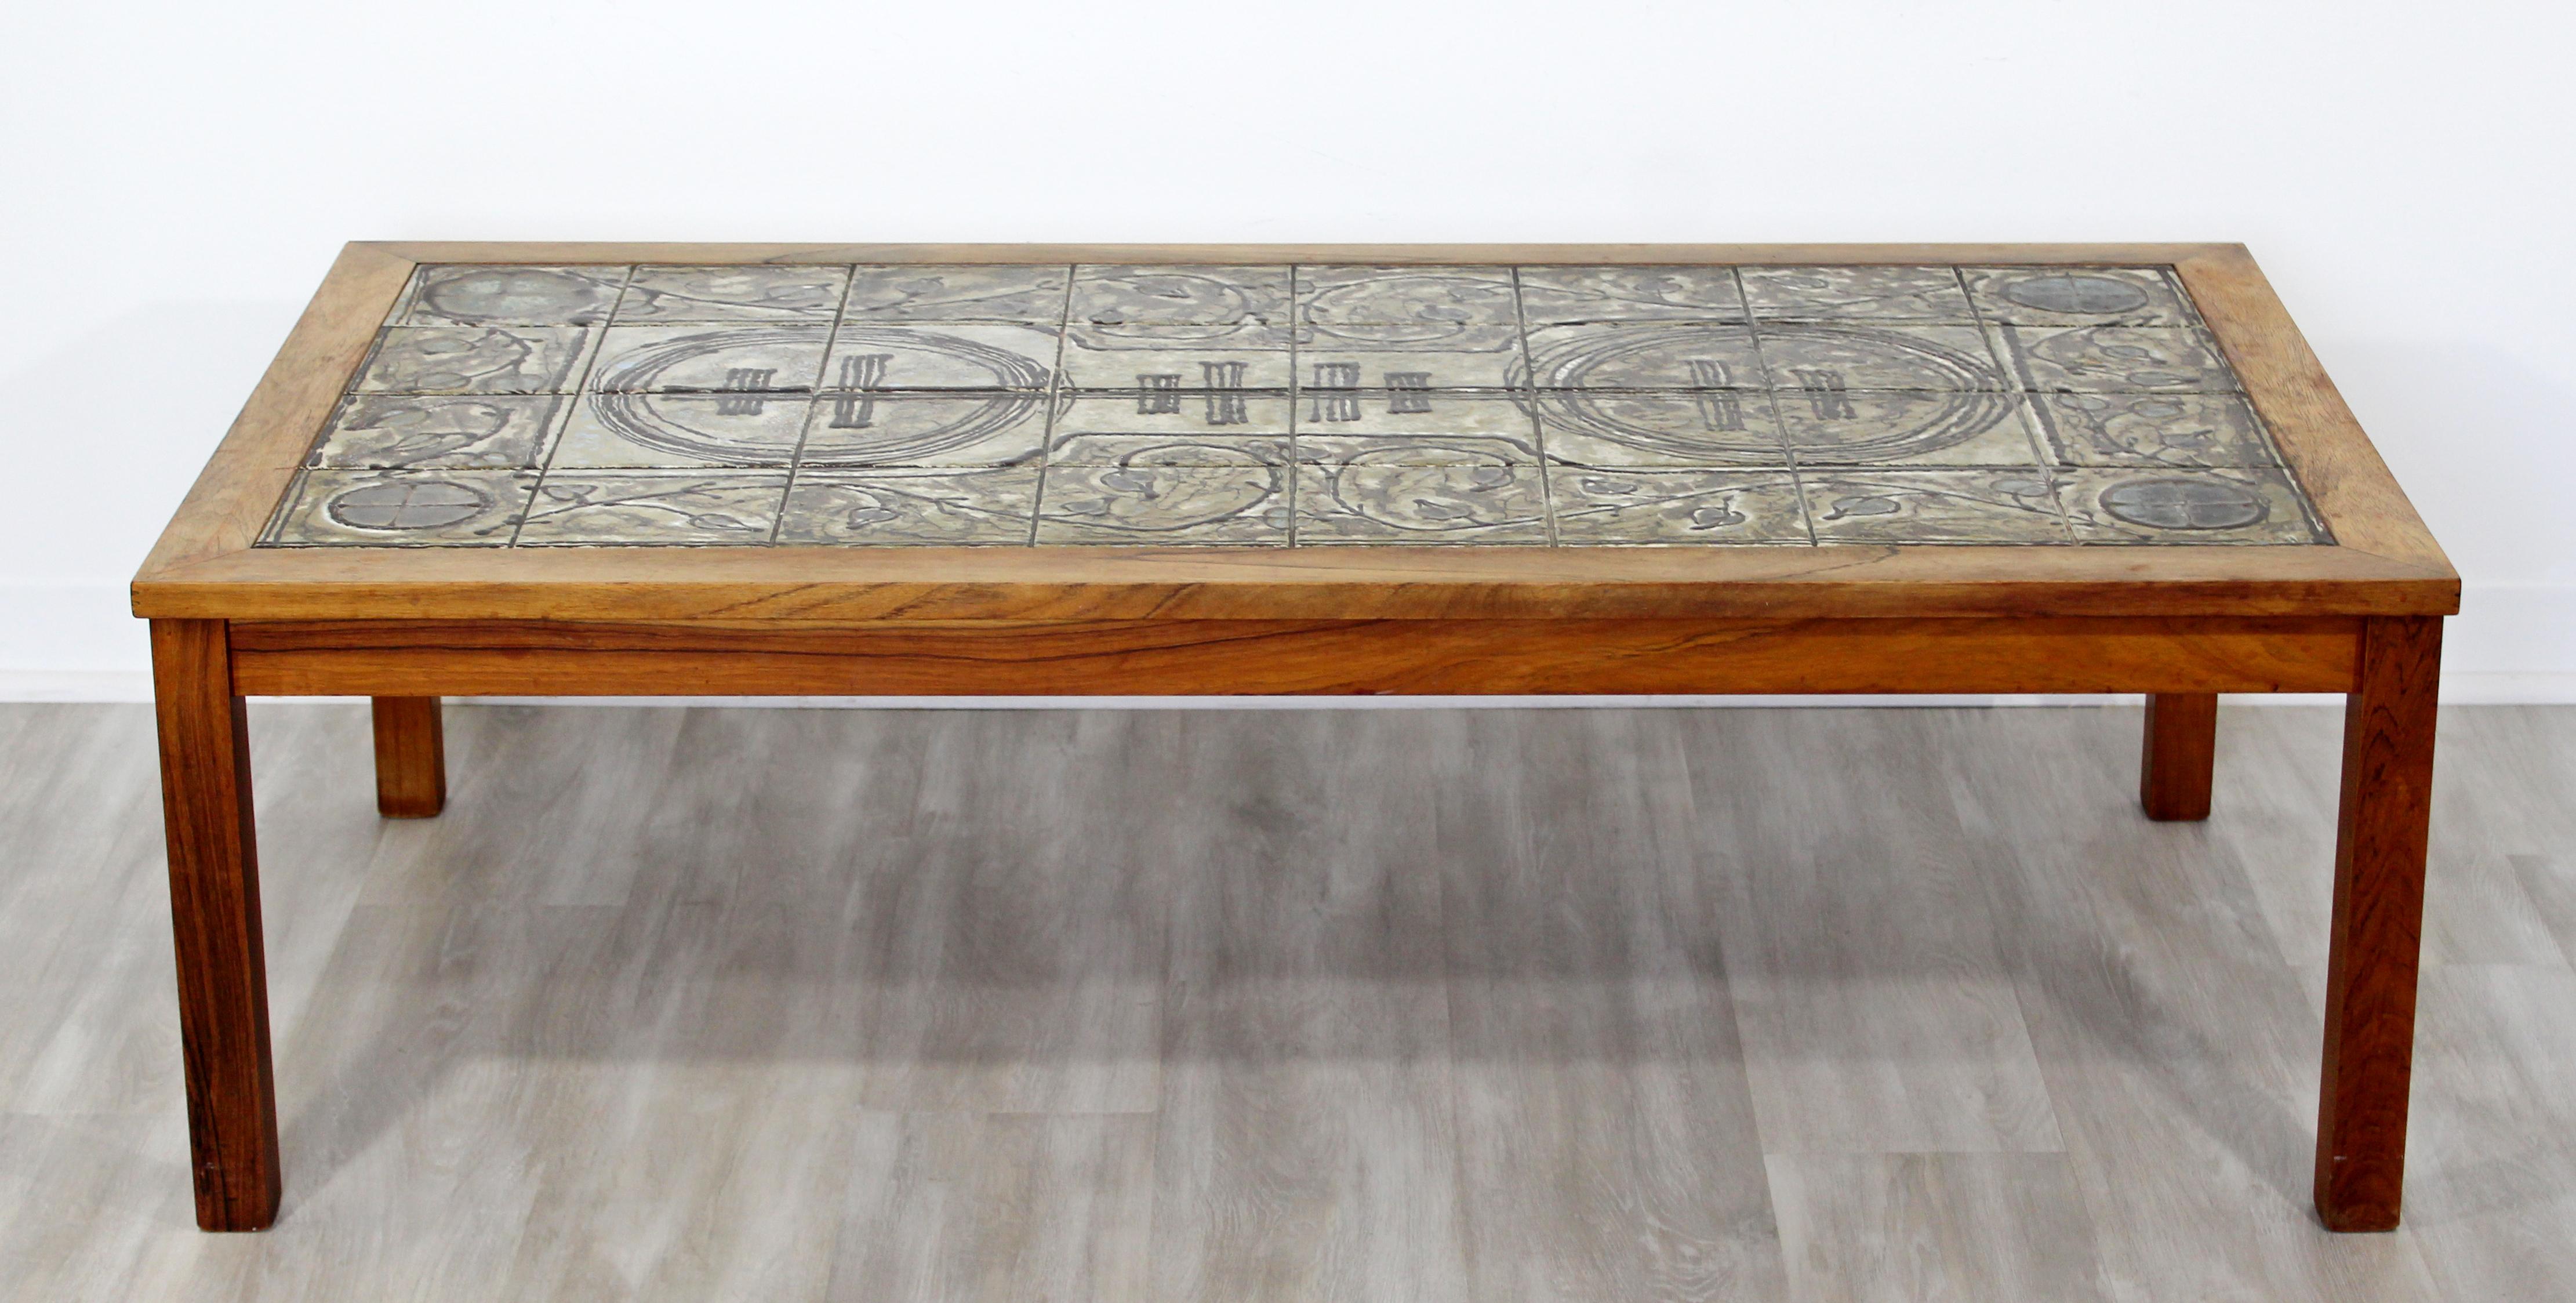 For your consideration is an incredible, wood coffee table, with tile design on the top, made by Trigh in Denmark, circa 1960s. In excellent condition. The dimensions are 53